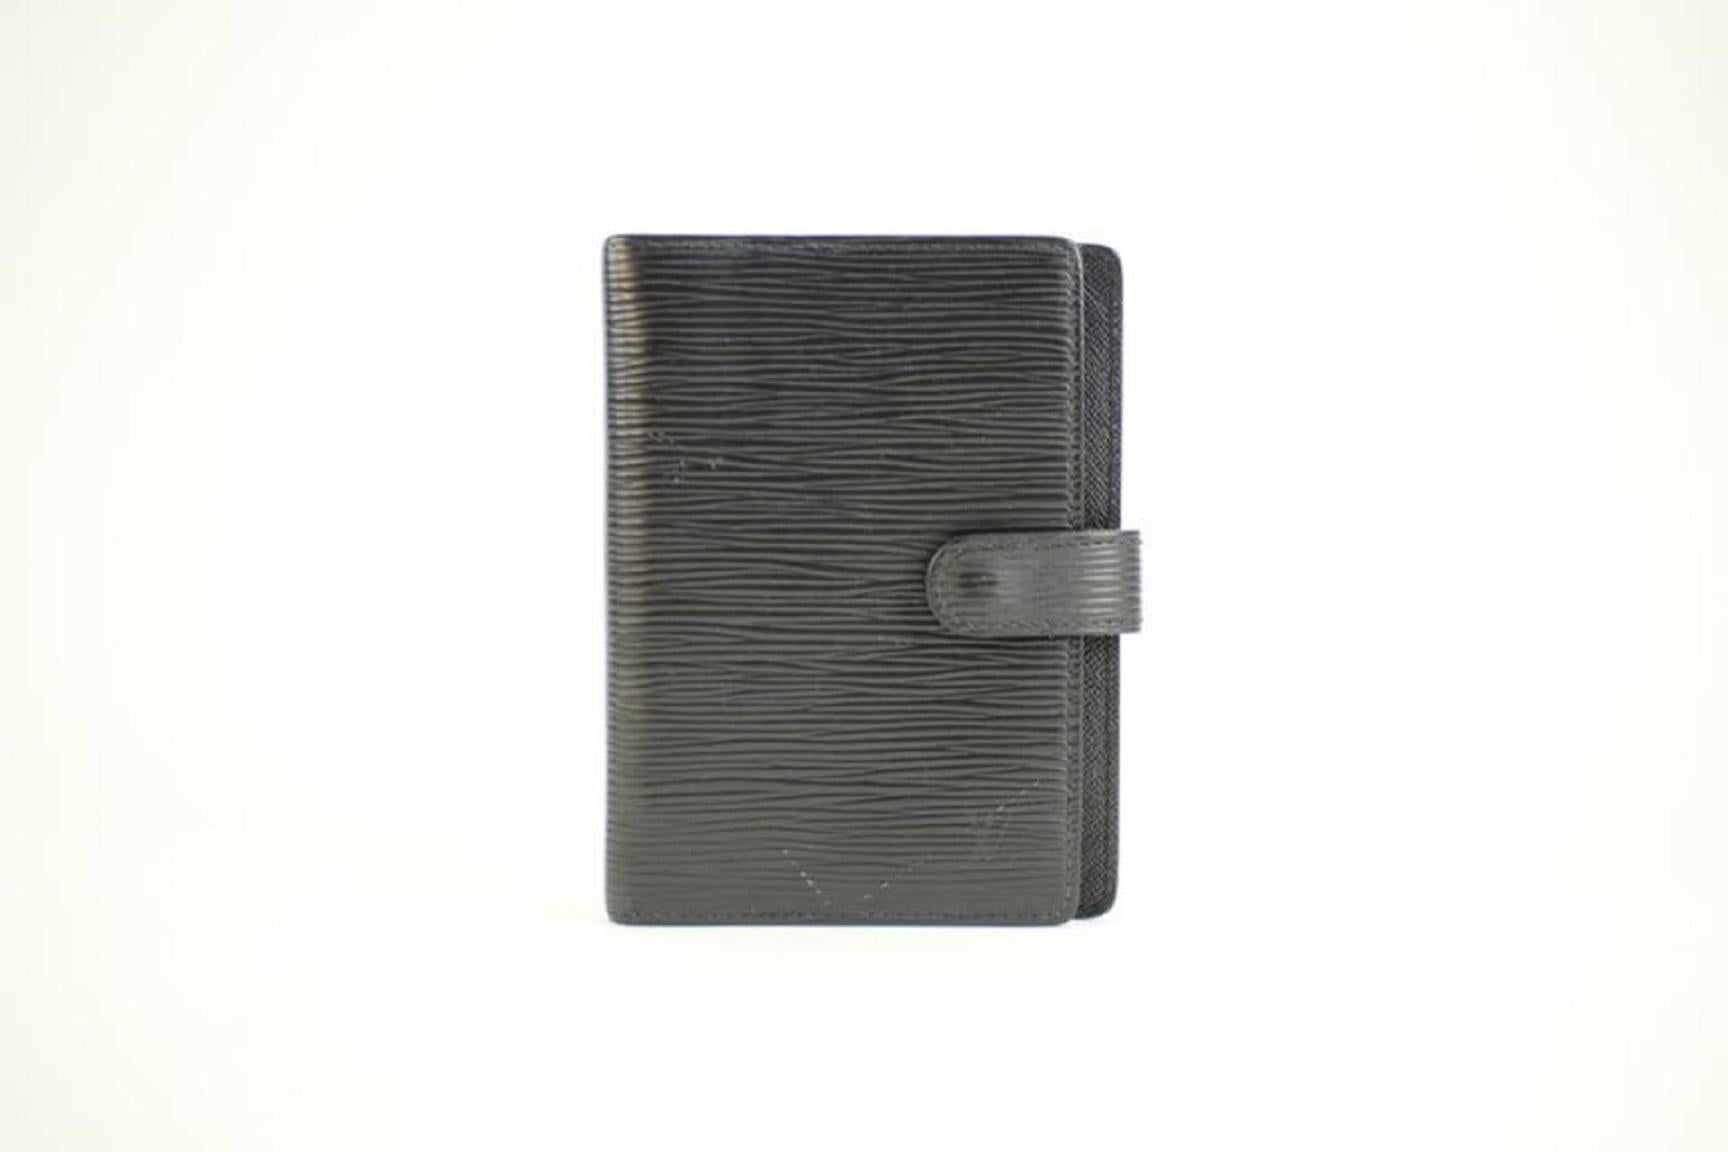 Louis Vuitton Black Epi Leather Small Ring Agenda PM Notebook Cover 86038 For Sale 2